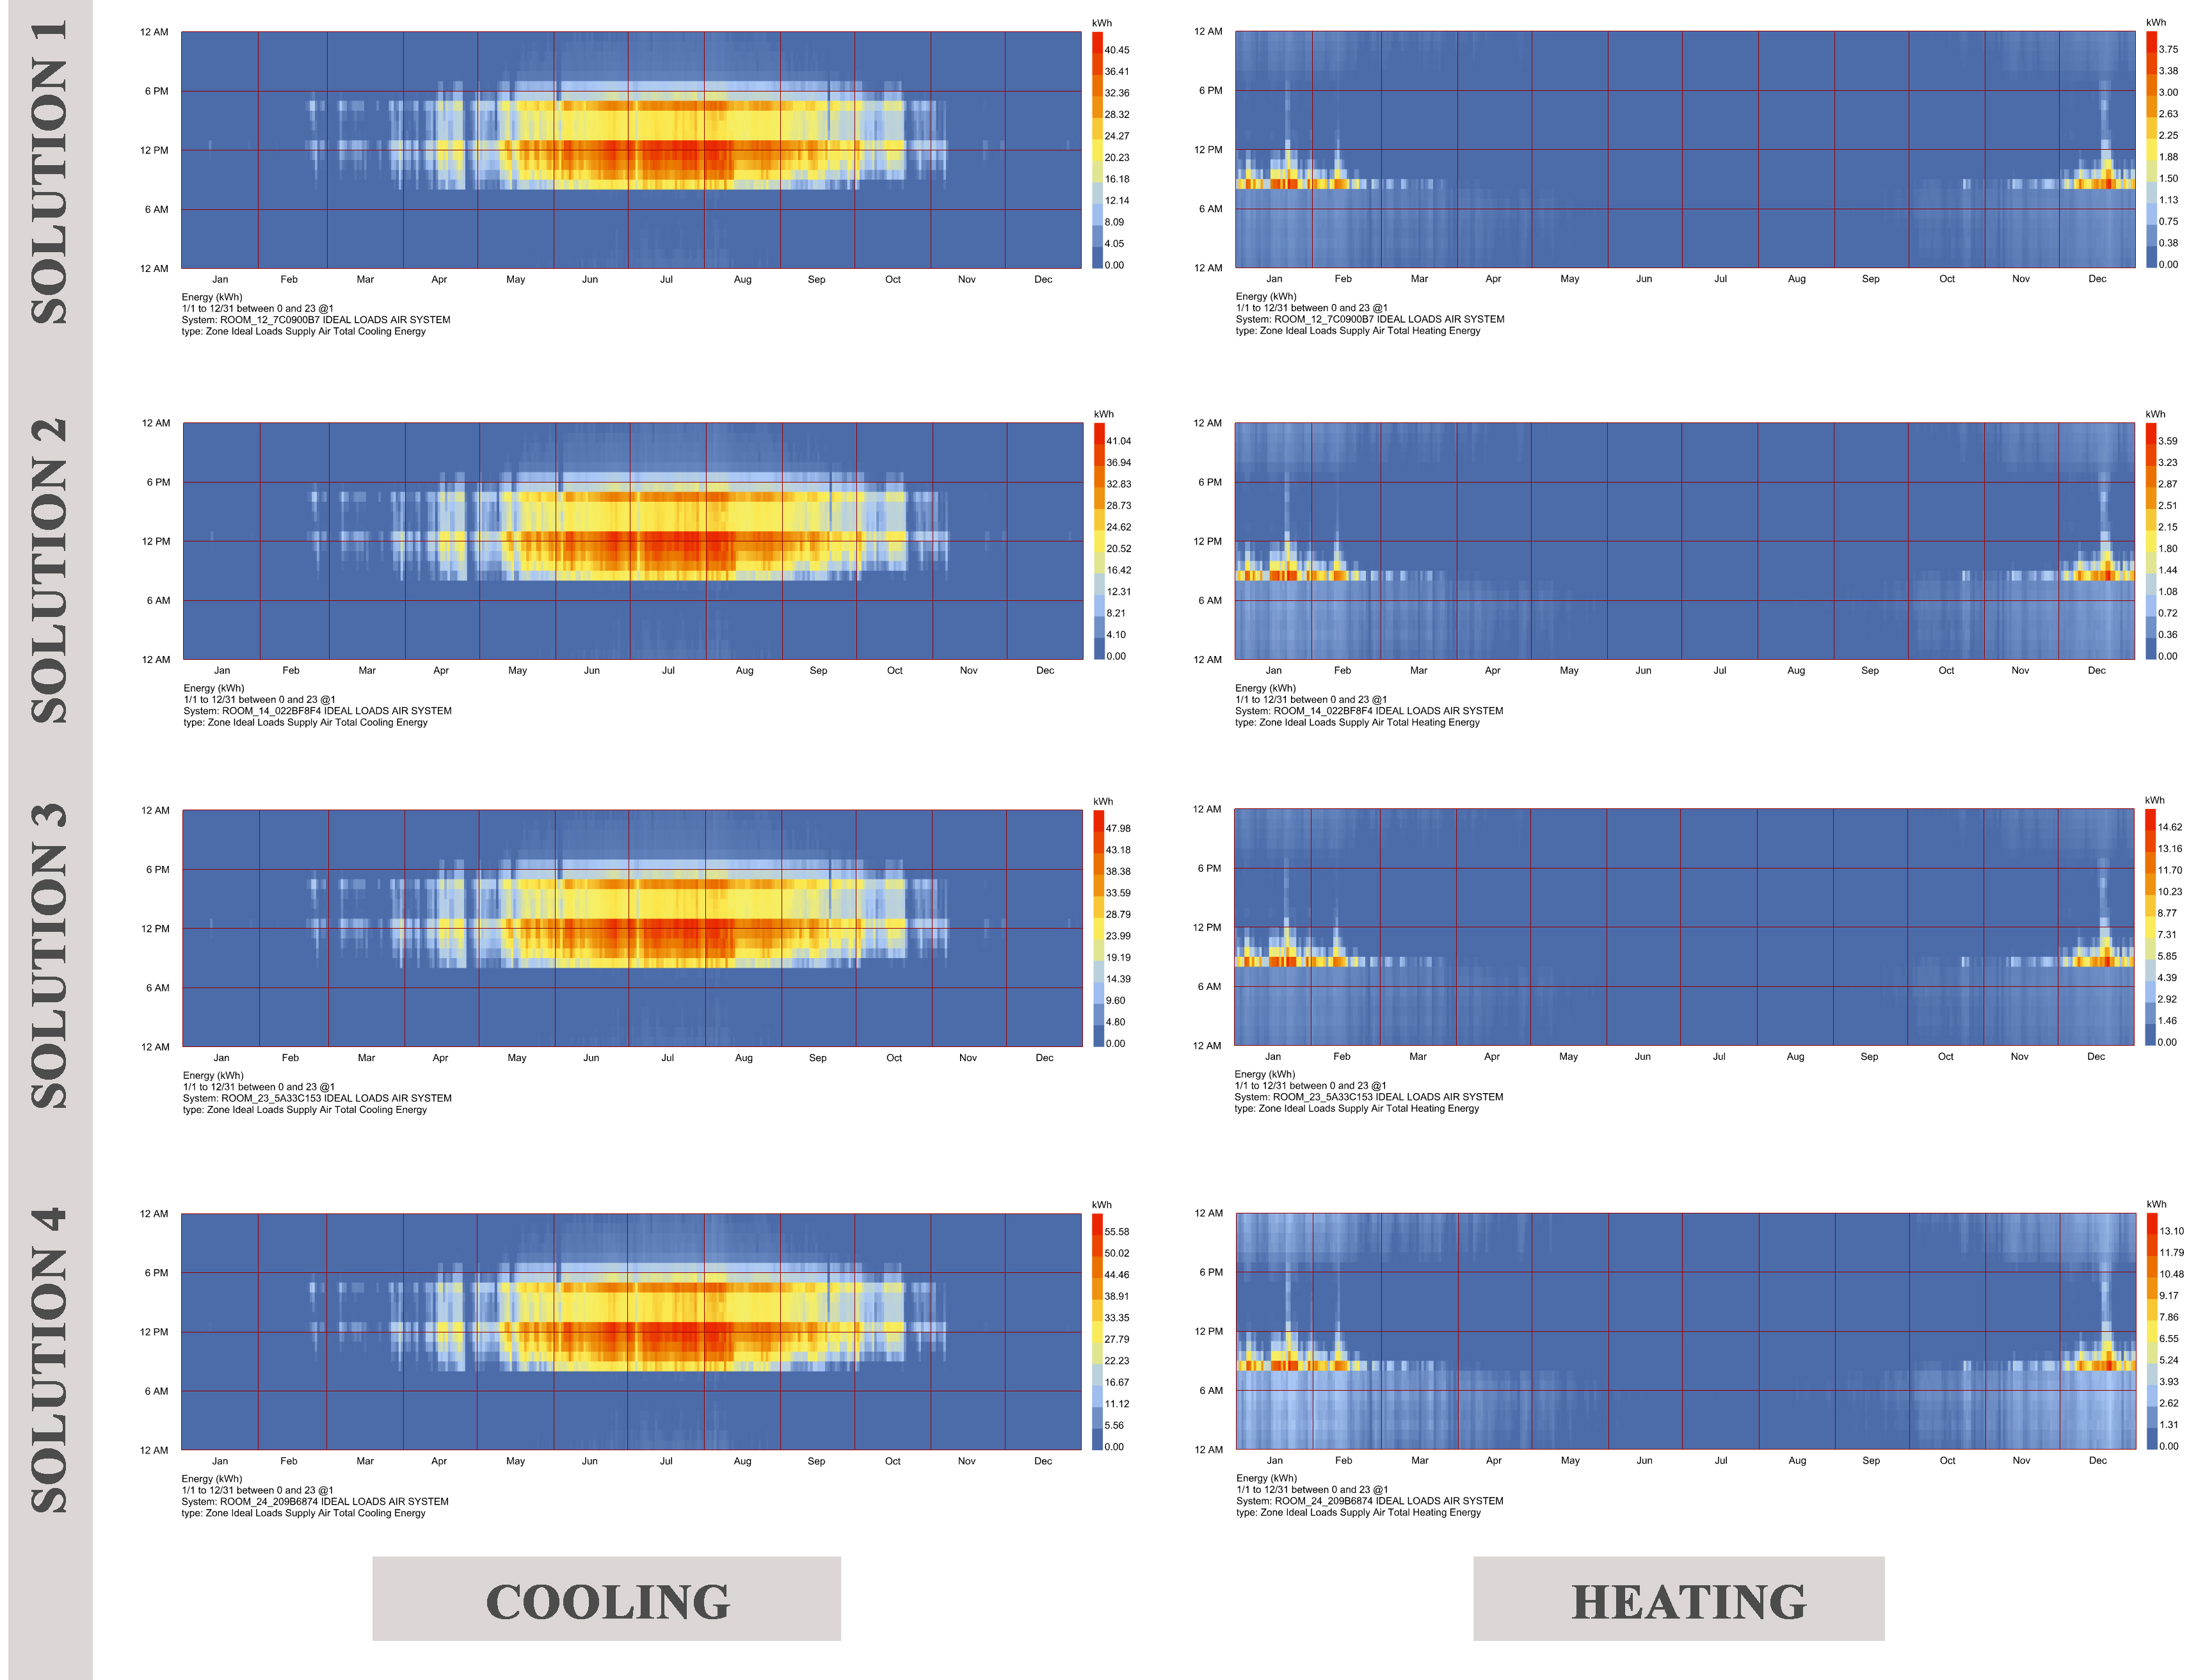 Cooling and heating energy consumption analysis for all four solutions.